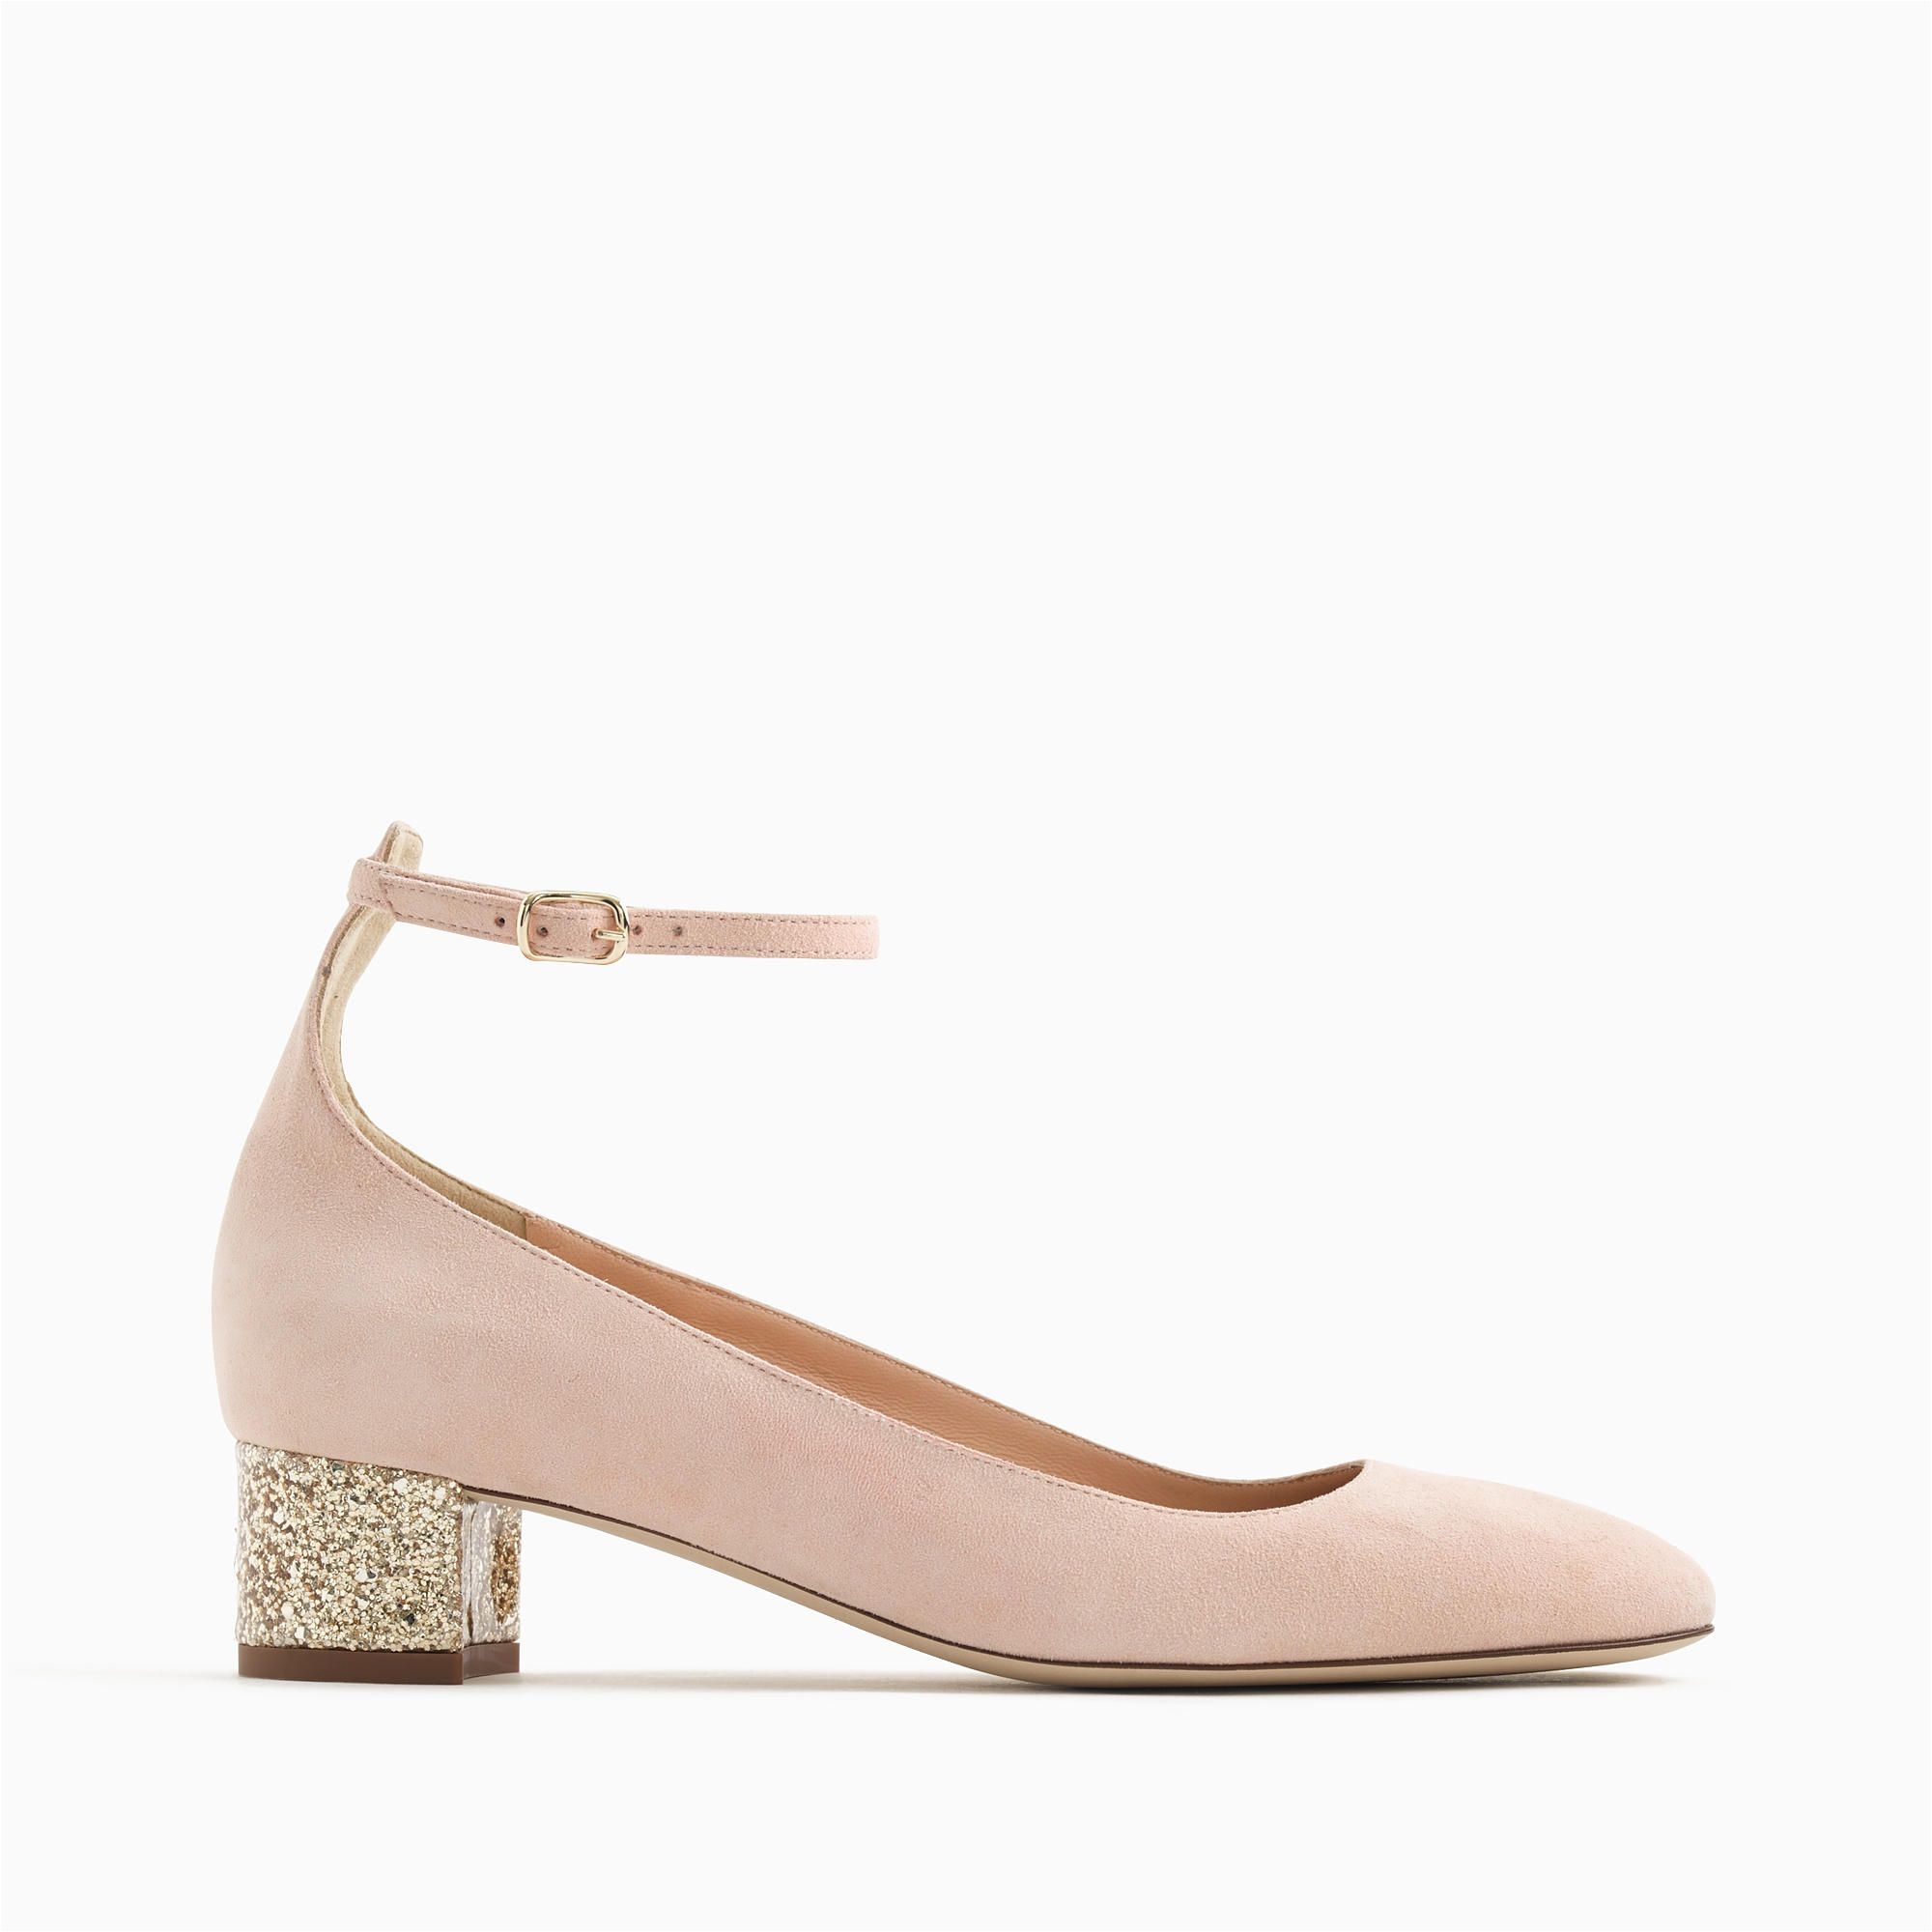 j crew contrast glitter heels in suede soldout but waiting for them